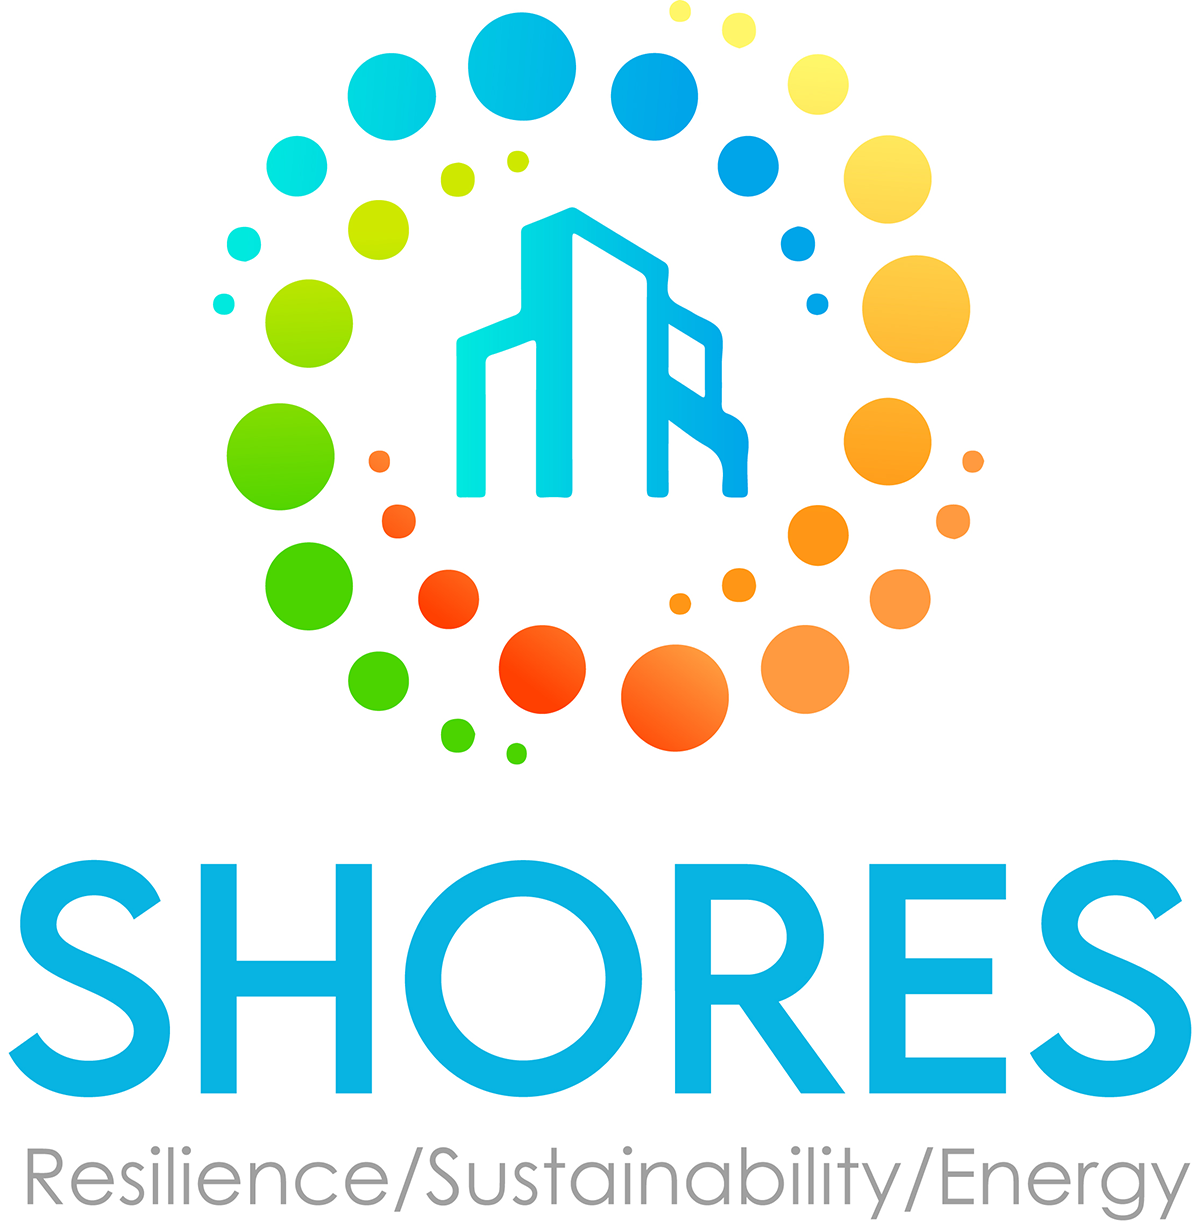 Sand Hazards and Opportunities for Resilience, Energy, and Sustainability (SHORES)